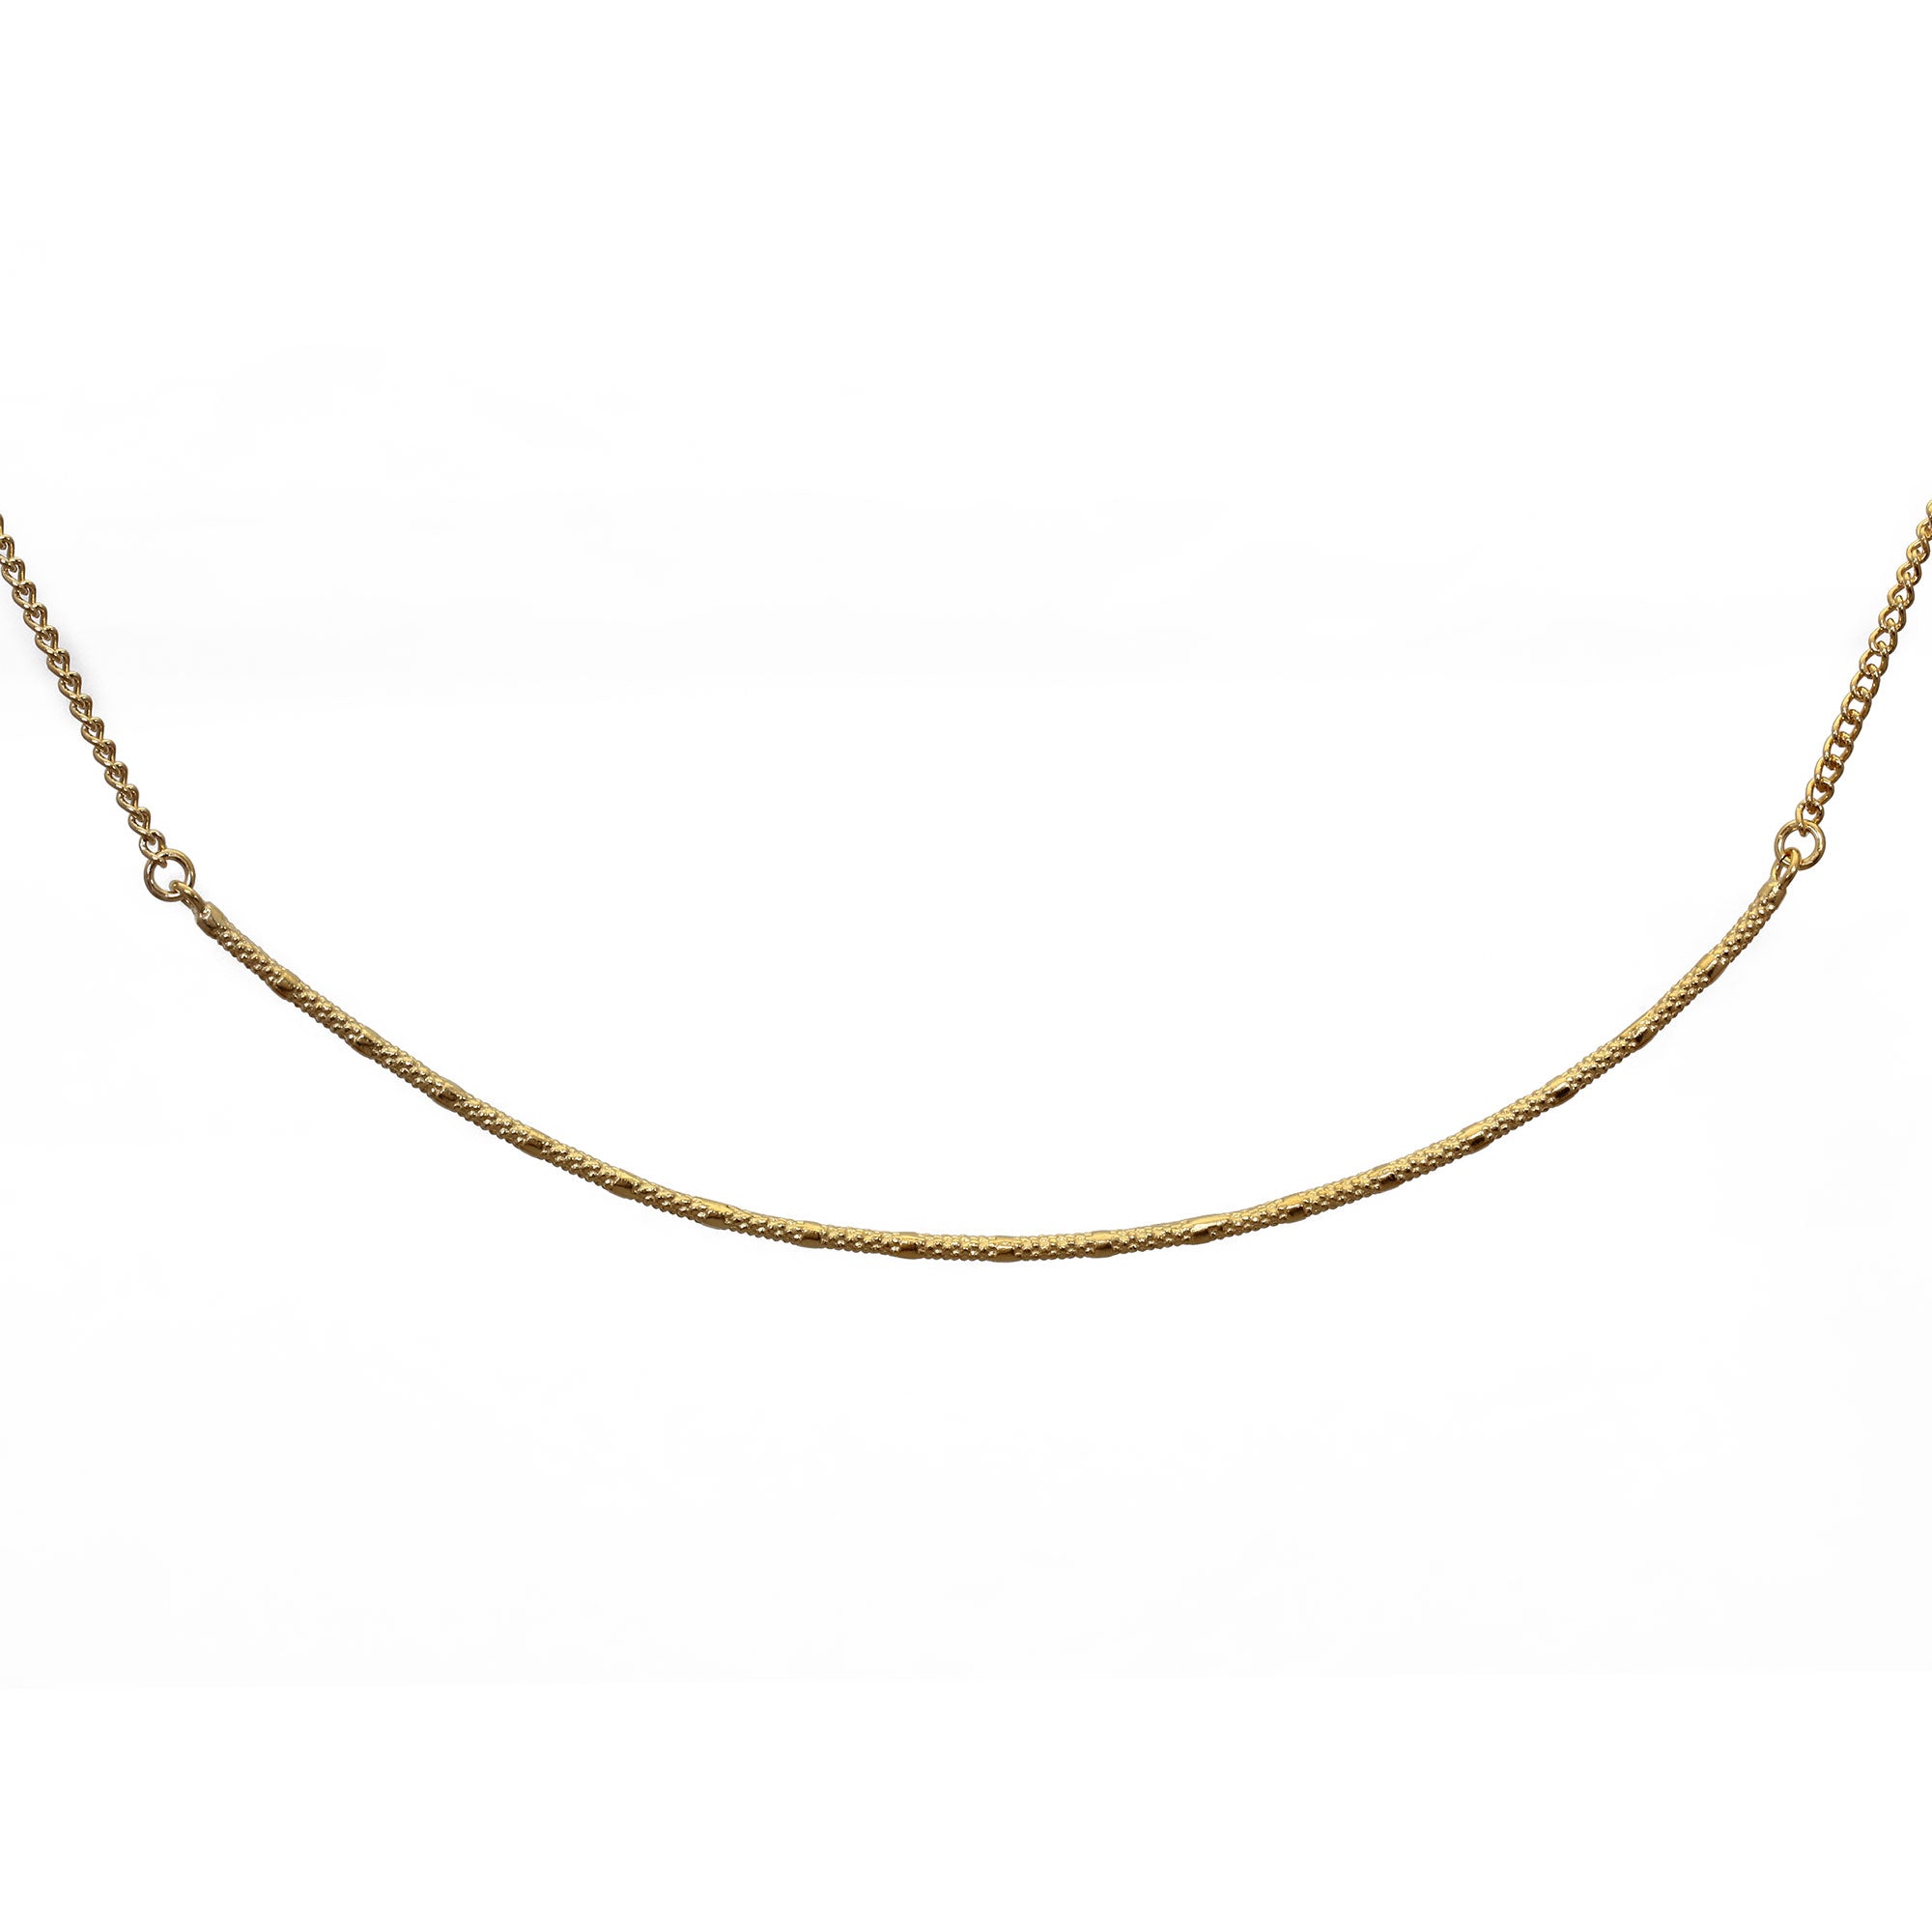 Fracture textured Yellow Gold Choker Necklace